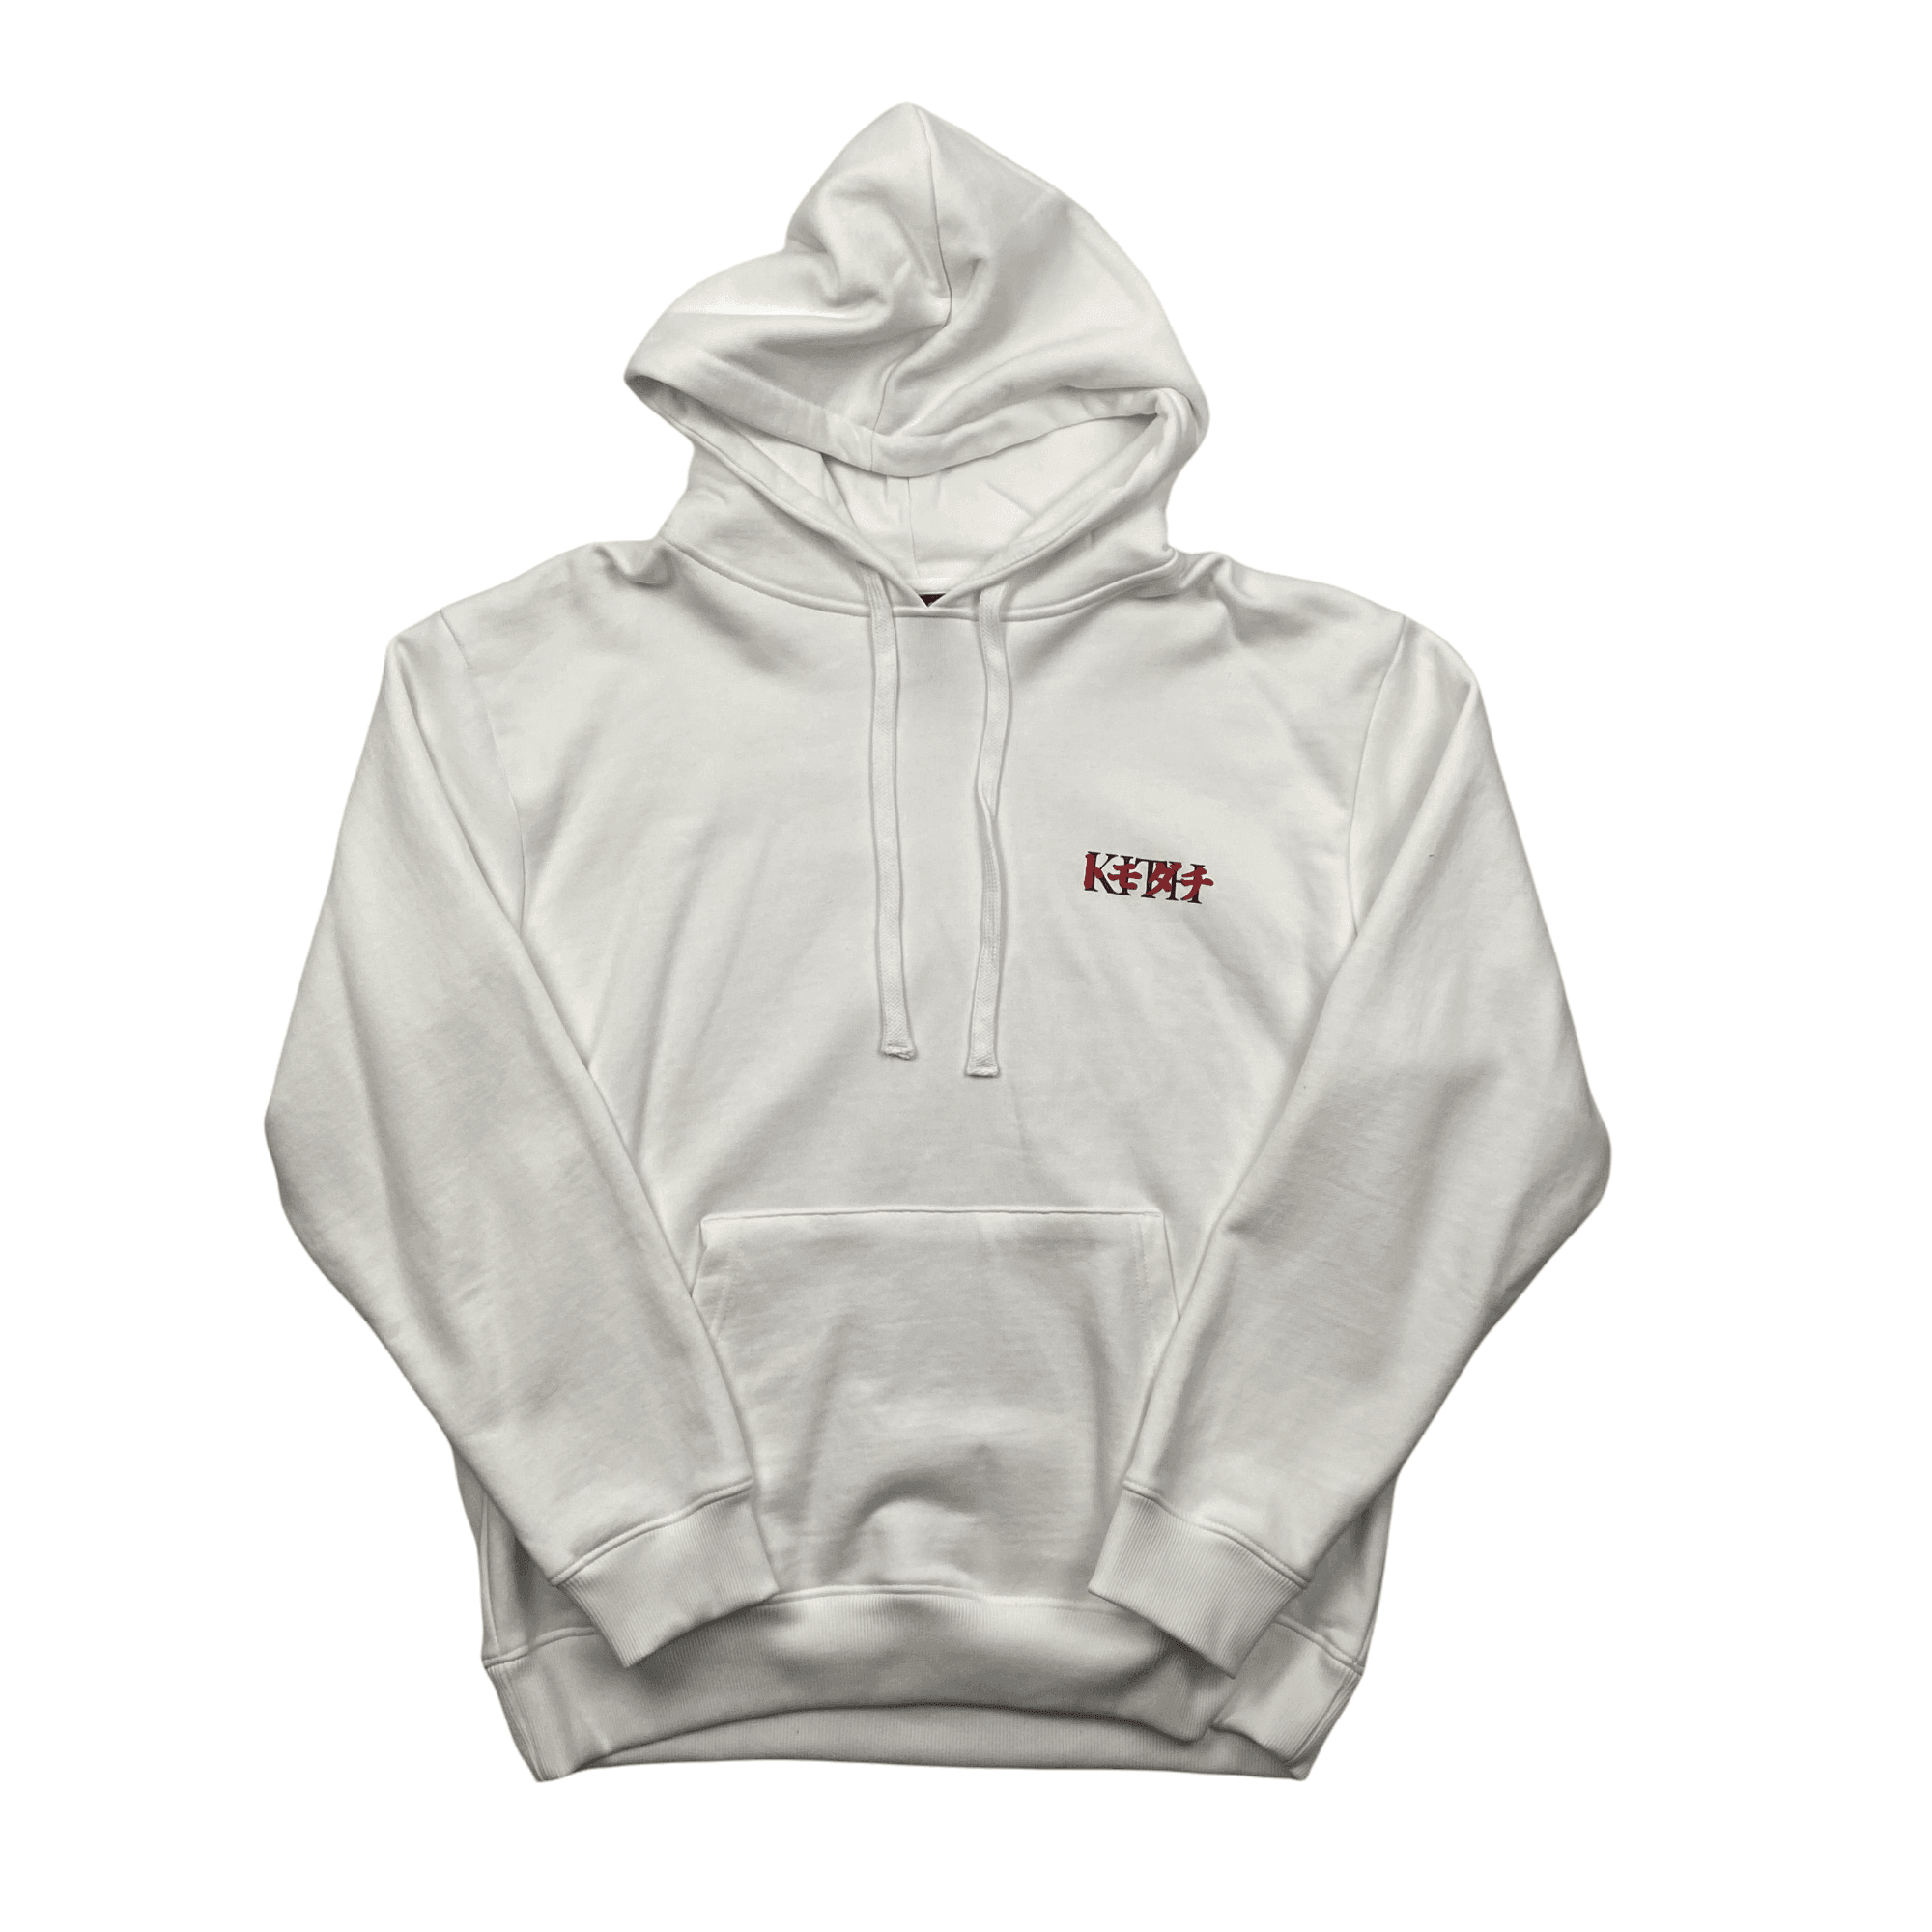 White Kith Tokyo Tower Hoodie - Extra Large - The Streetwear Studio